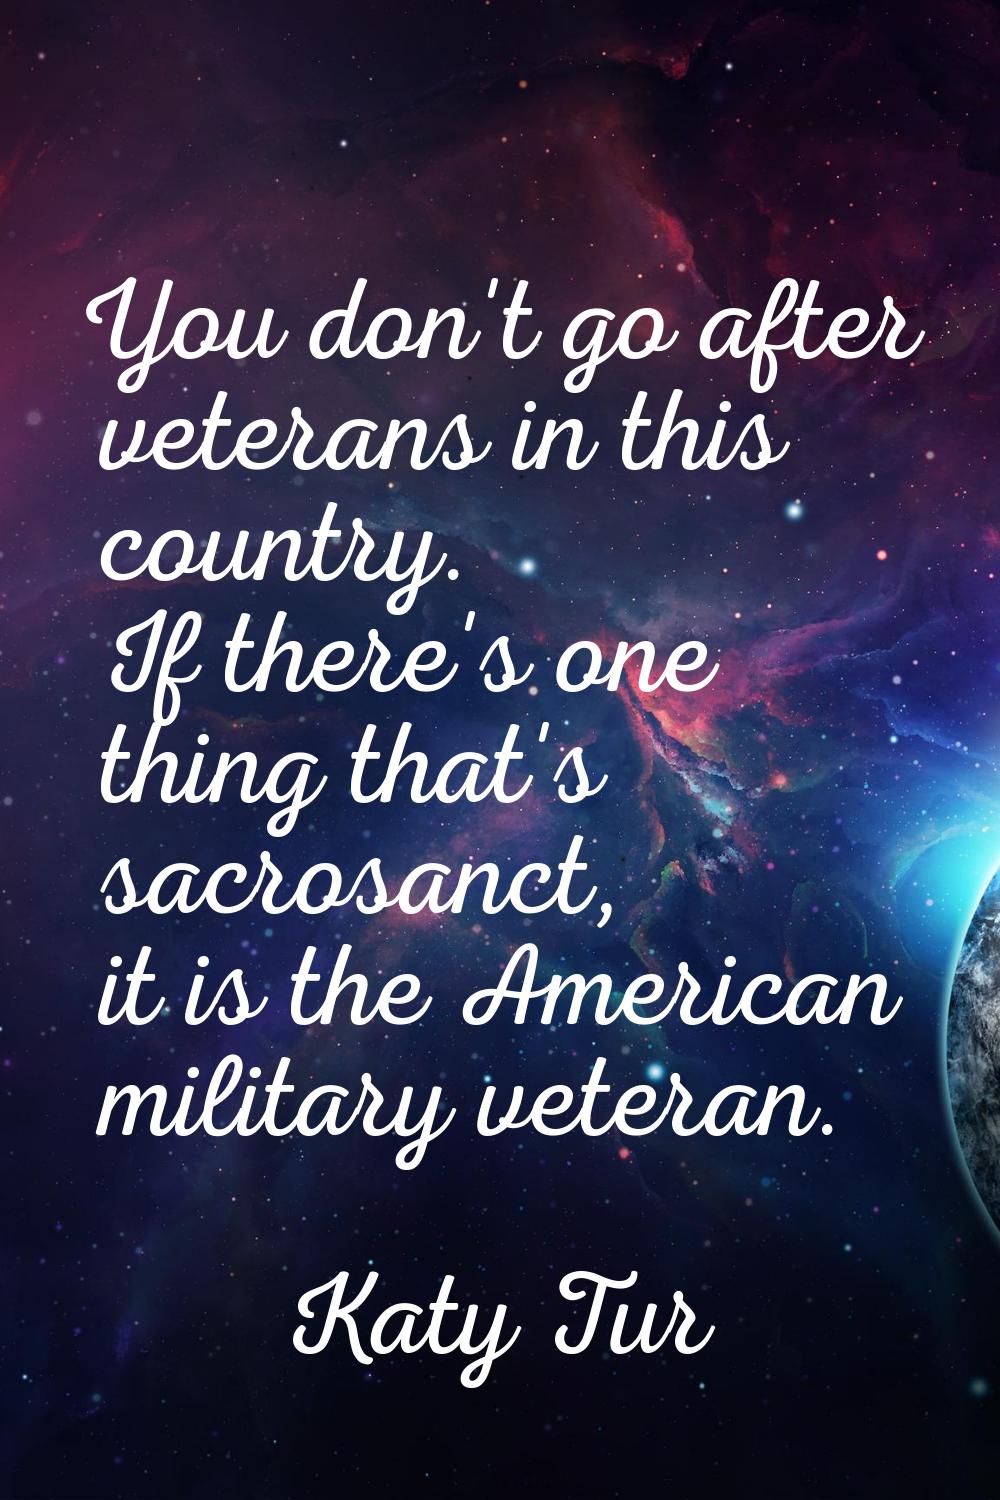 You don't go after veterans in this country. If there's one thing that's sacrosanct, it is the Amer